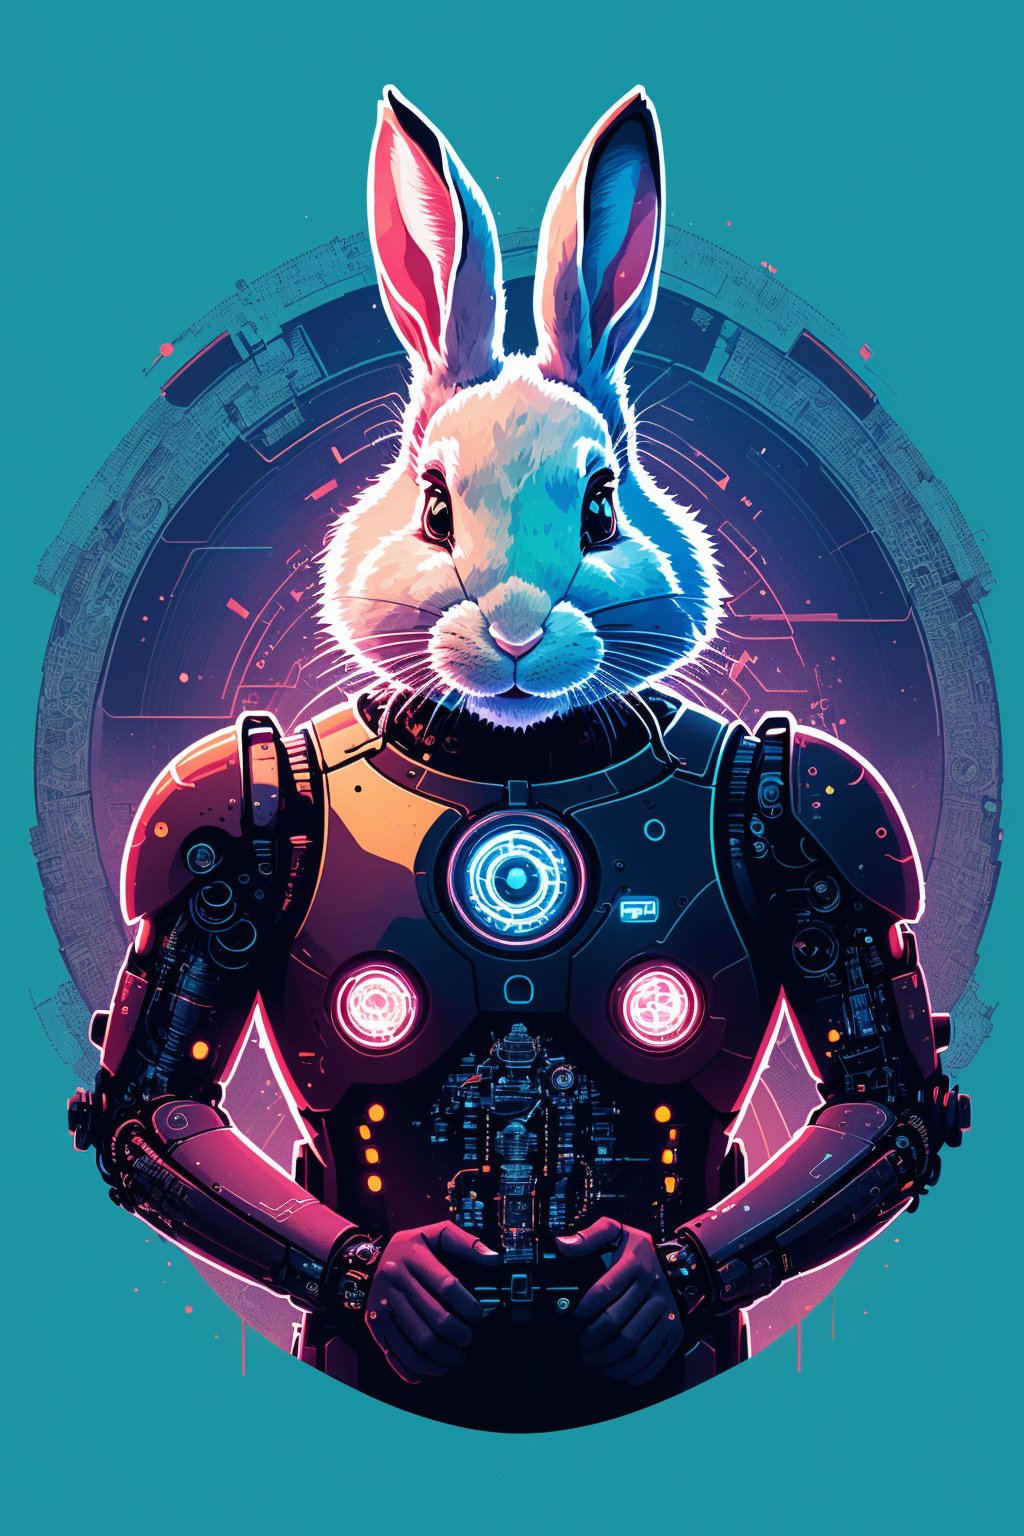 Create an (8K, high-definition resolution) vector illustration of a (male cyborg) in a (standing position). The composition should achieve (perfect centralization) with the character (Donnie's rabbit) by his side. The cyborg is (centered) and (facing the camera) with a gaze that signifies (nearing perfection). Yet, there's a sense of (sadness) and (despair) evident in his expression. The illustration should depict the cyborg's (full body) with his (hands on his head), conveying an (abstract beauty) in a (dynamic) and (highly detailed) style. The image should have (smooth) and (sharp focus) to capture intricate details, creating an impressive and emotionally charged piece of (illustration).